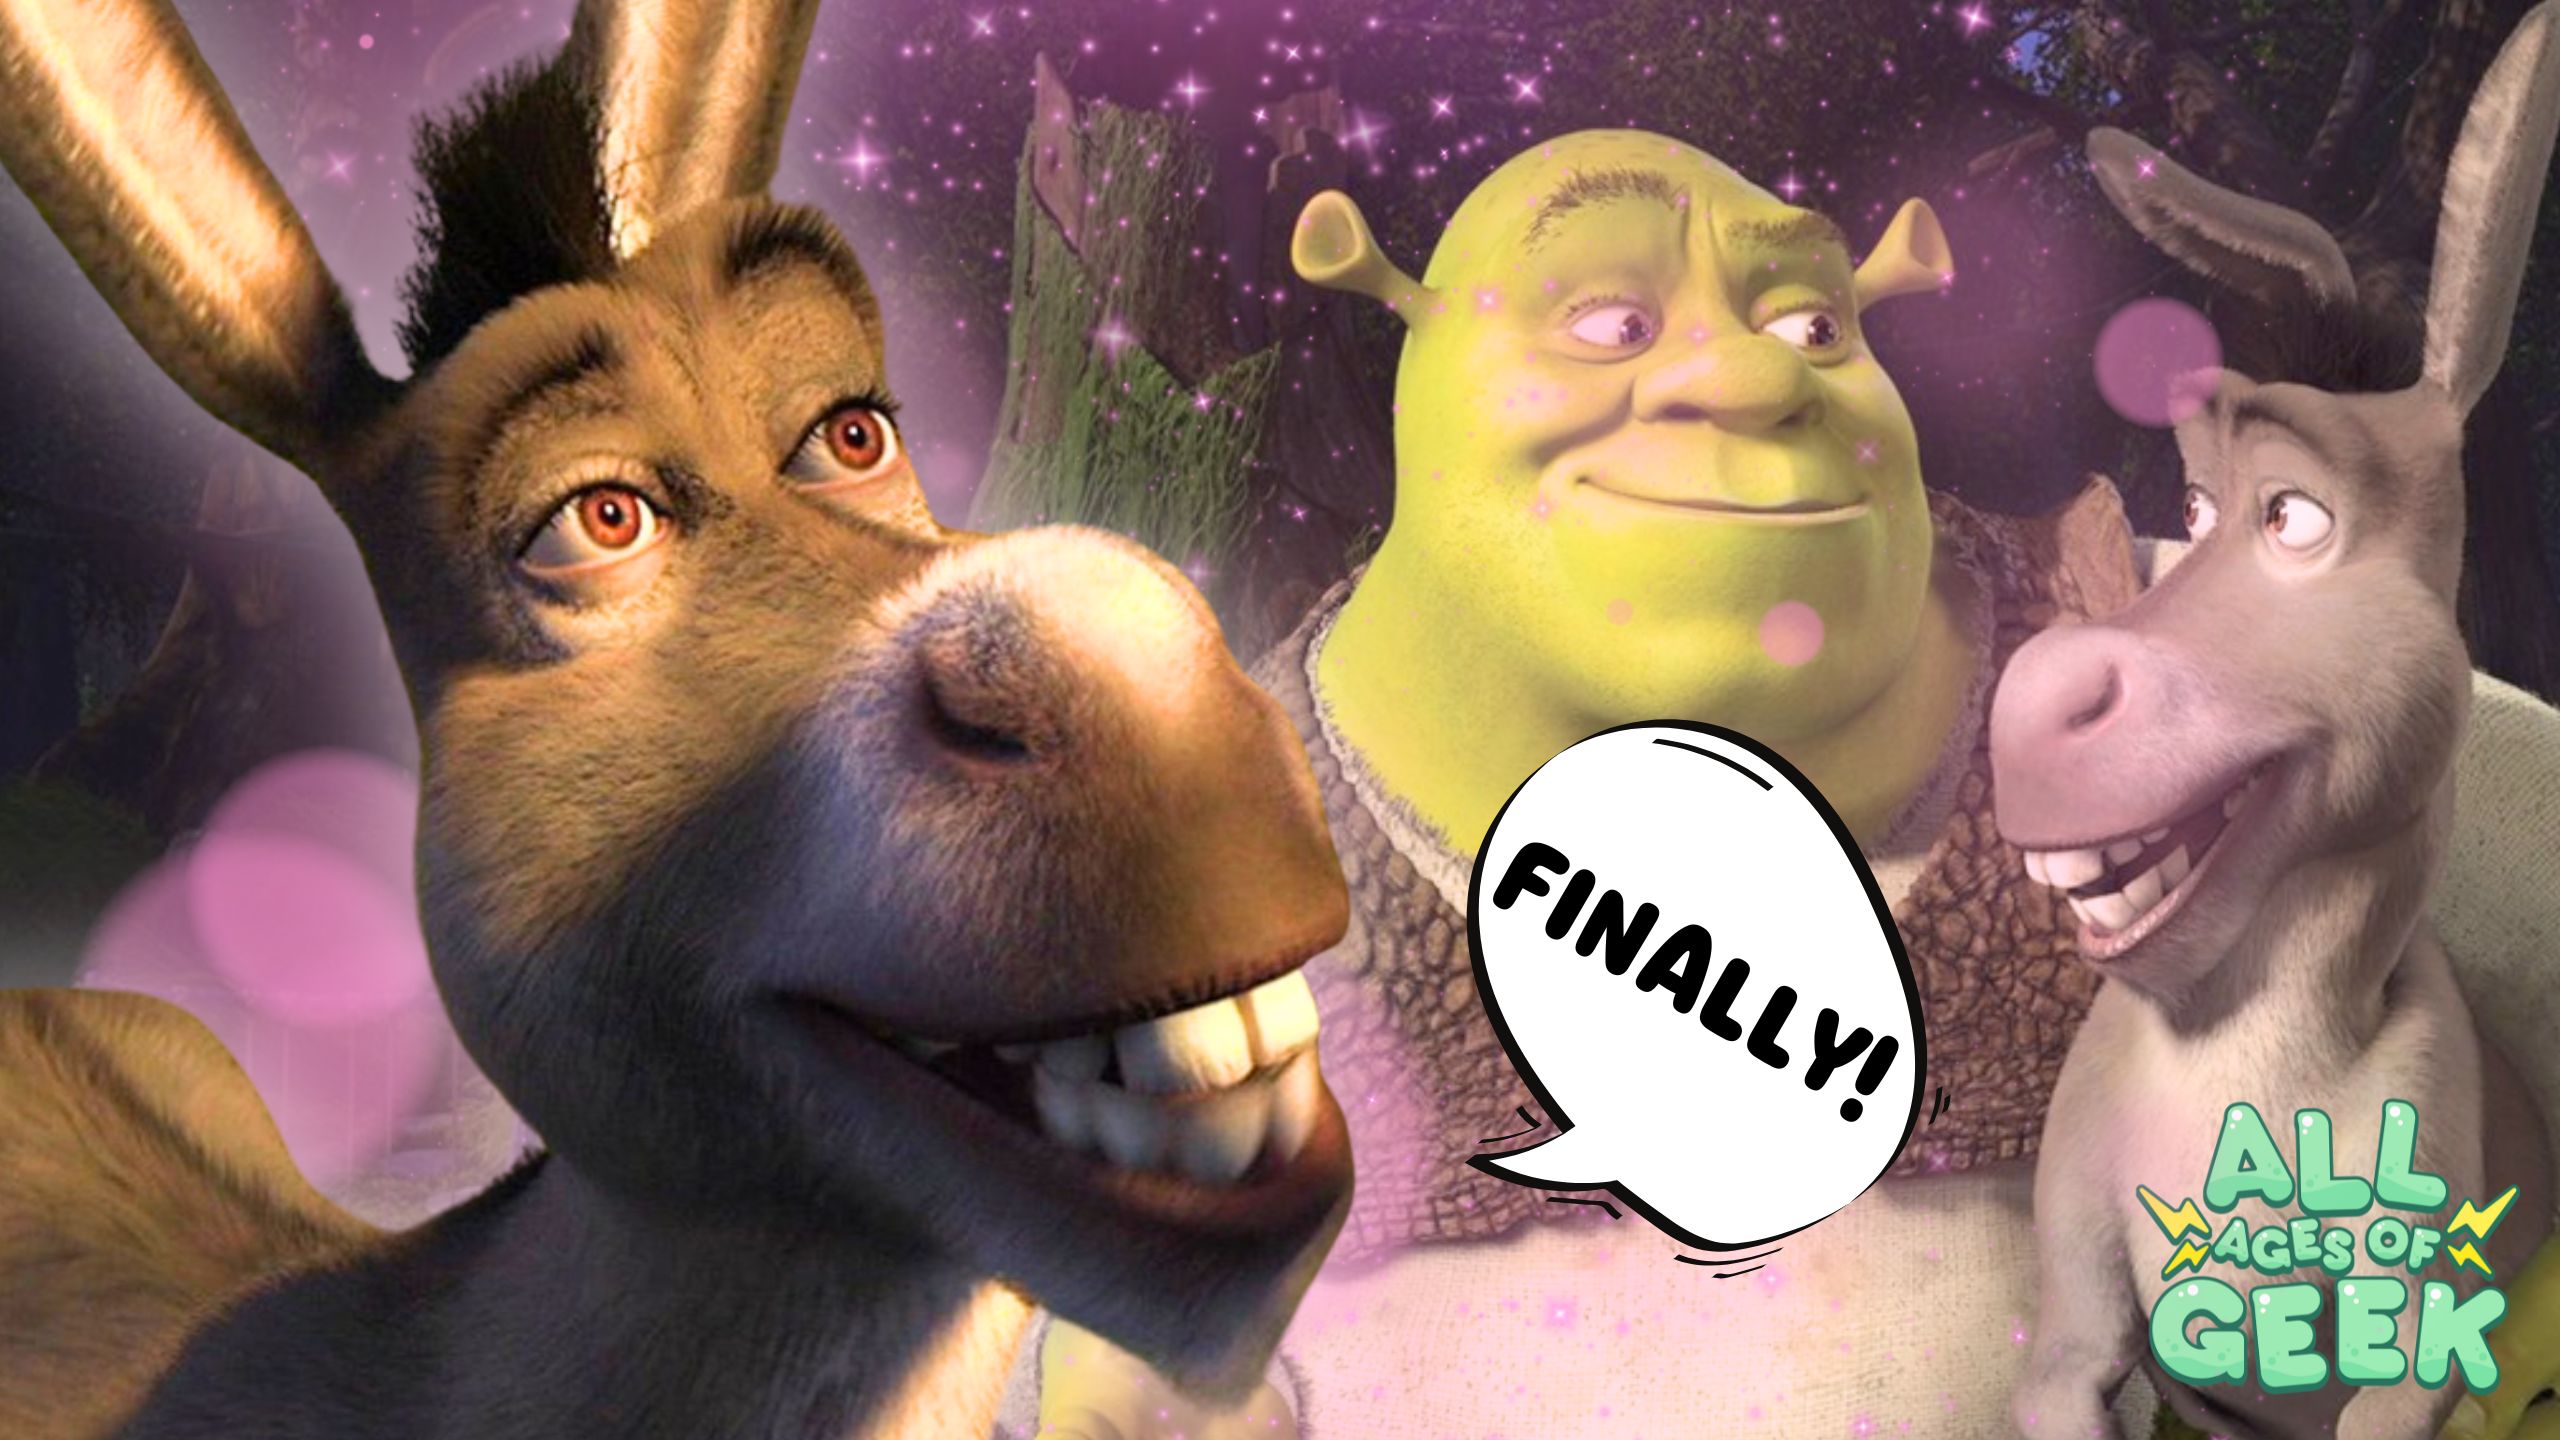 The image shows Donkey from the Shrek series with a large smile, Shrek in the background looking at Donkey, and another smaller image of Donkey to the right. There is a speech bubble coming from Donkey that says "FINALLY!" The background is decorated with a sparkling, magical effect, and the All Ages of Geek logo is visible in the lower right corner.